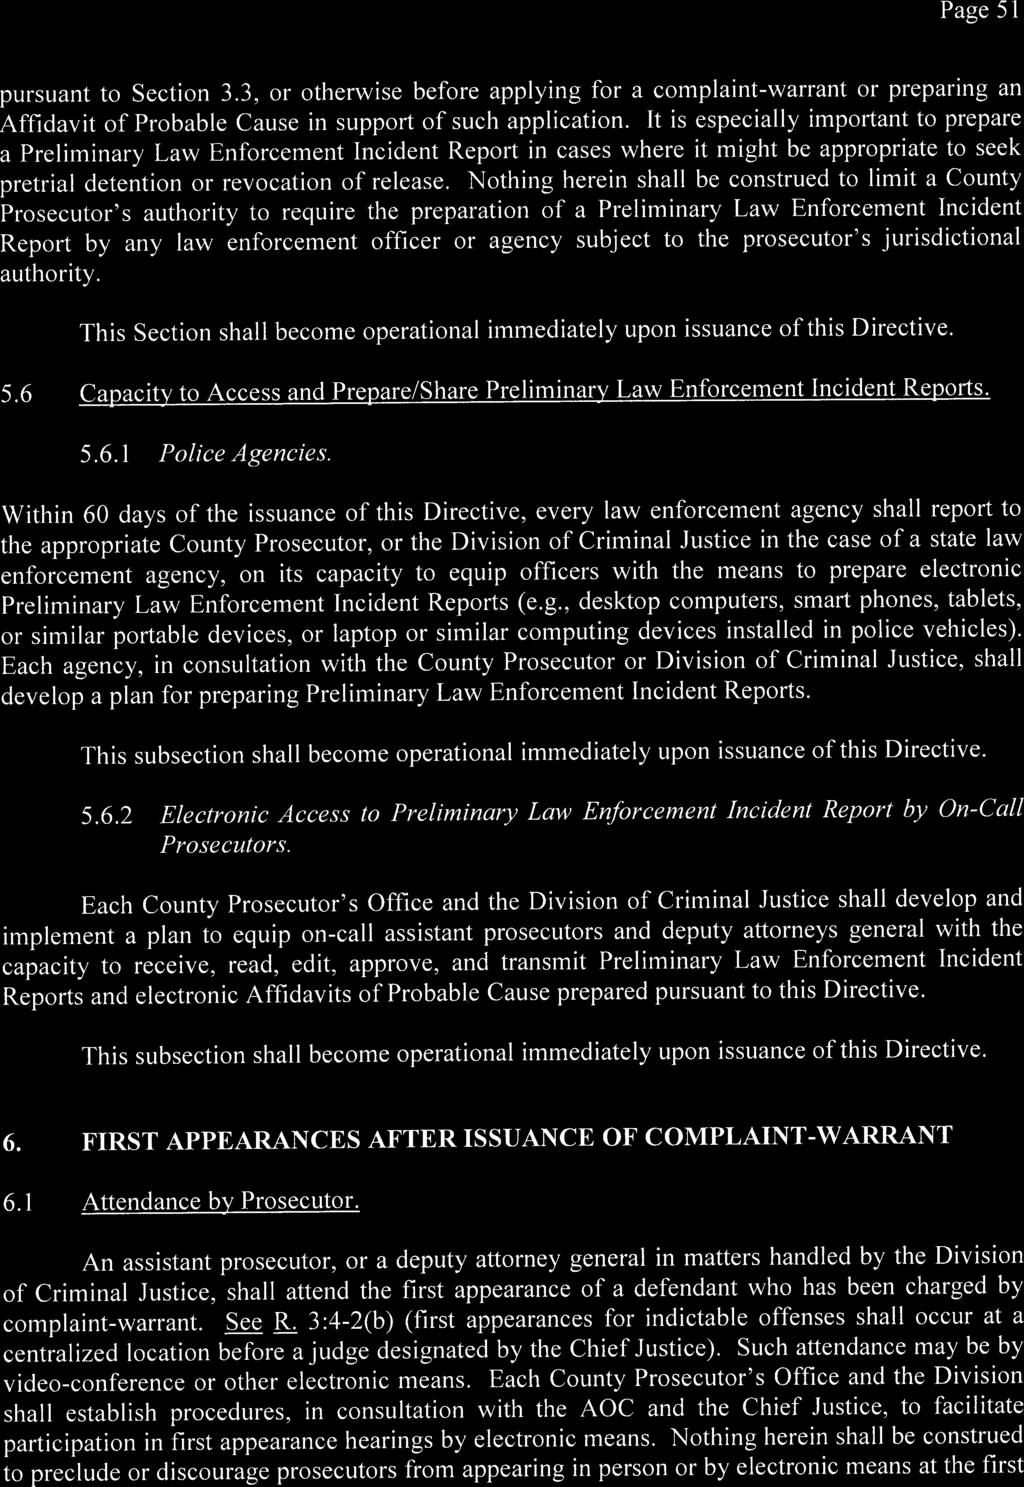 Page 51 pursuant to Section 3.3, or otherwise before applying for acomplaint-warrant or preparing an Affidavit of Probable Cause in support of such application.